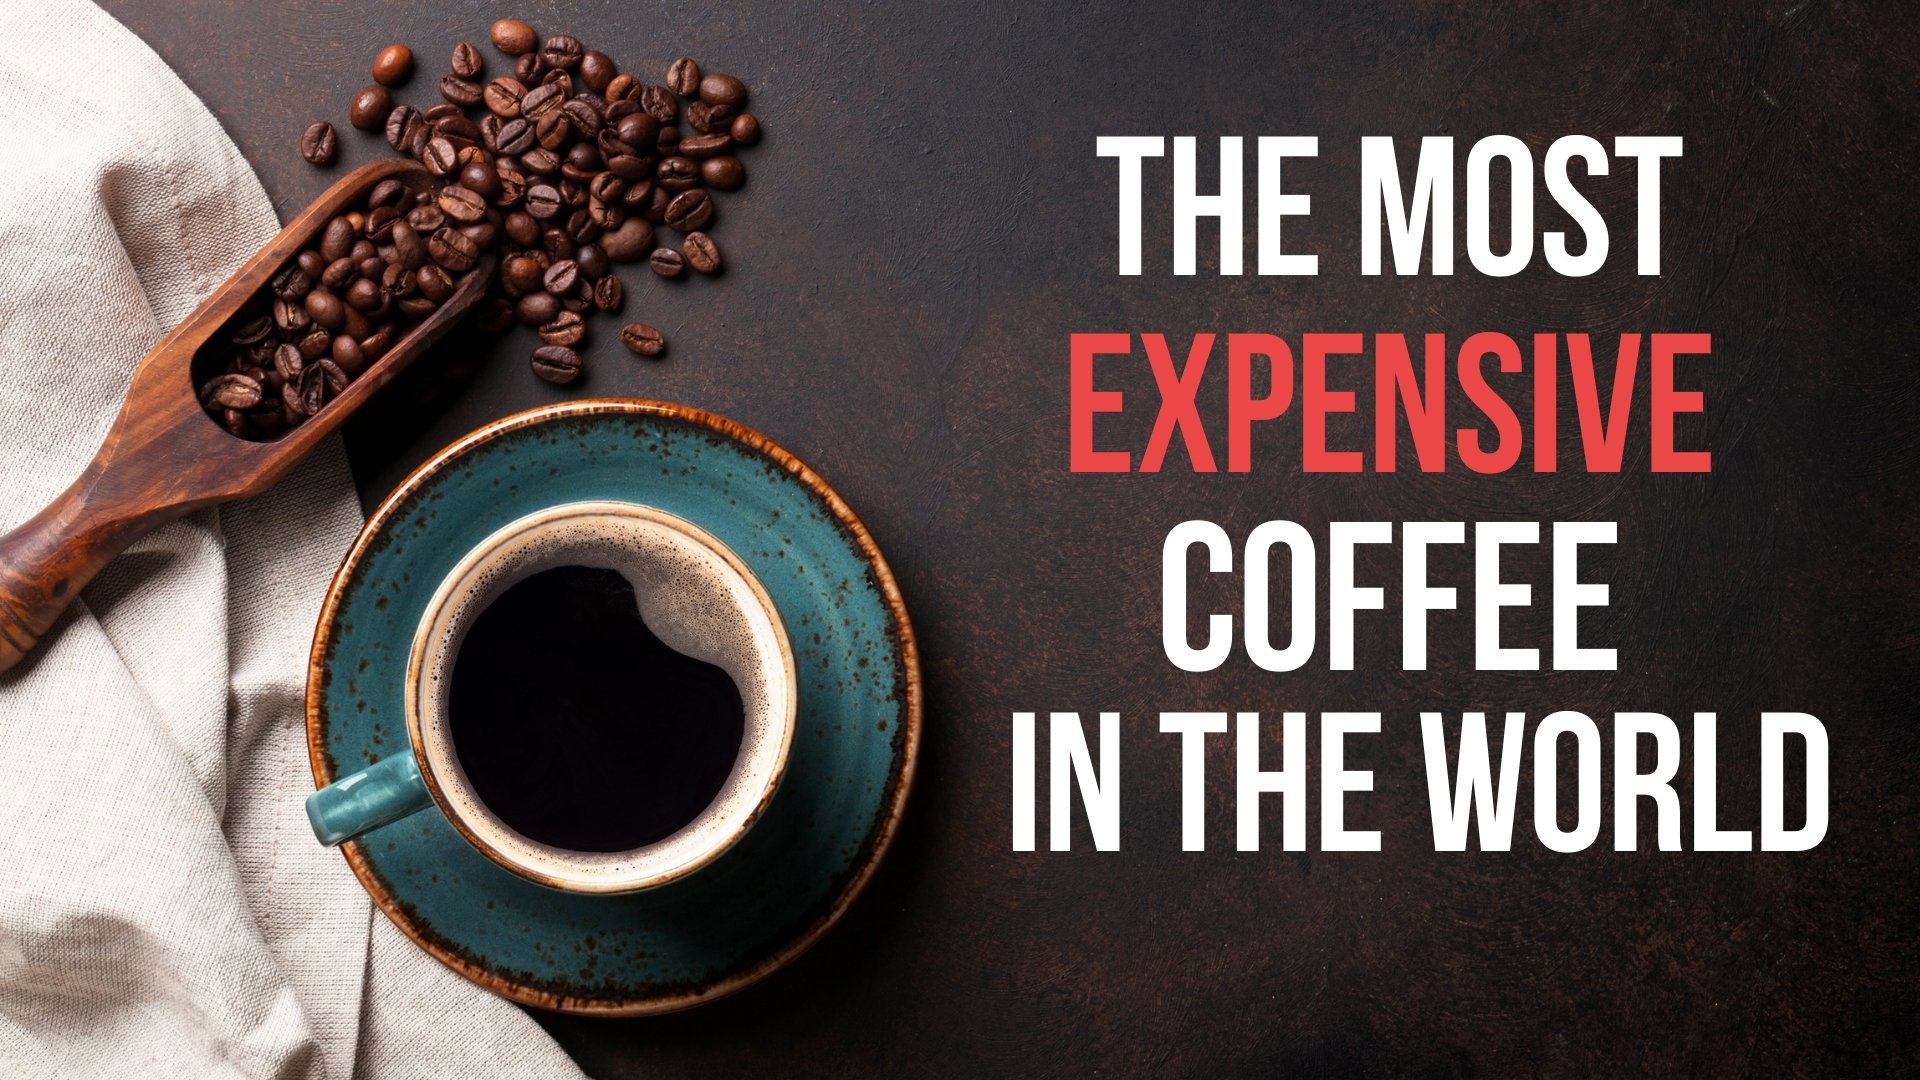 There are six of the most expensive coffees in the world